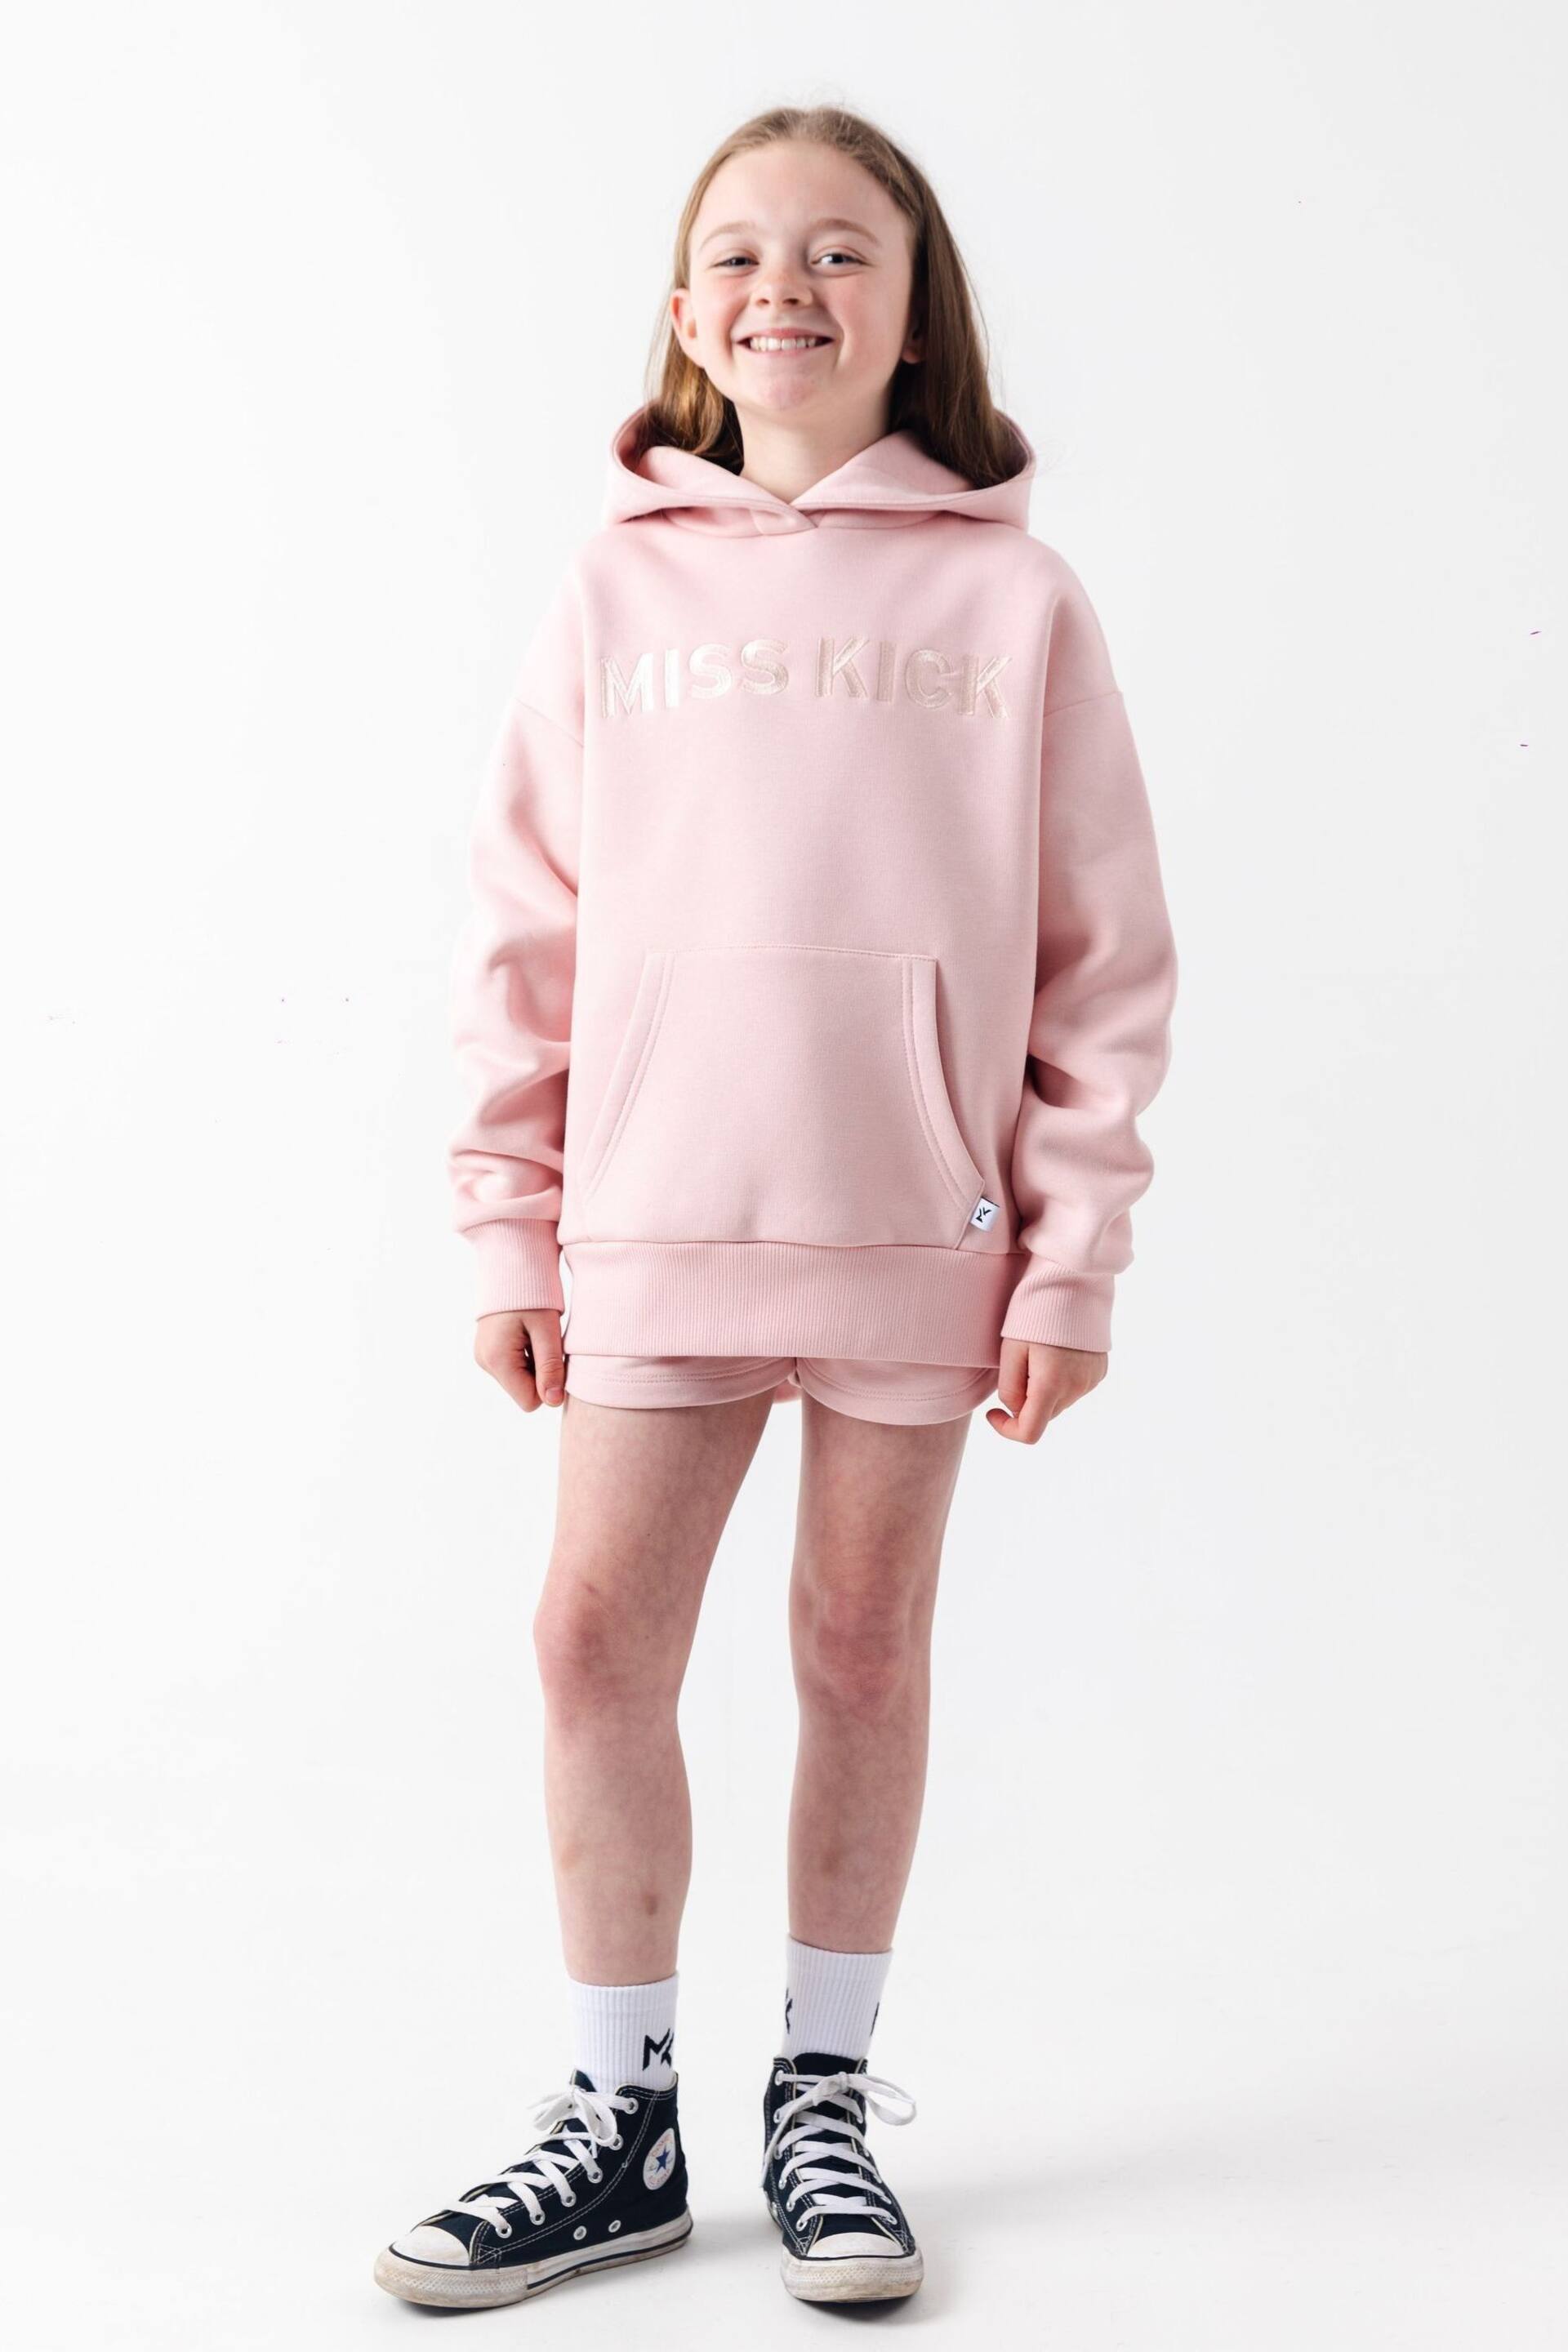 Miss Kick Girls Leah Embroided Hoodie - Image 3 of 5